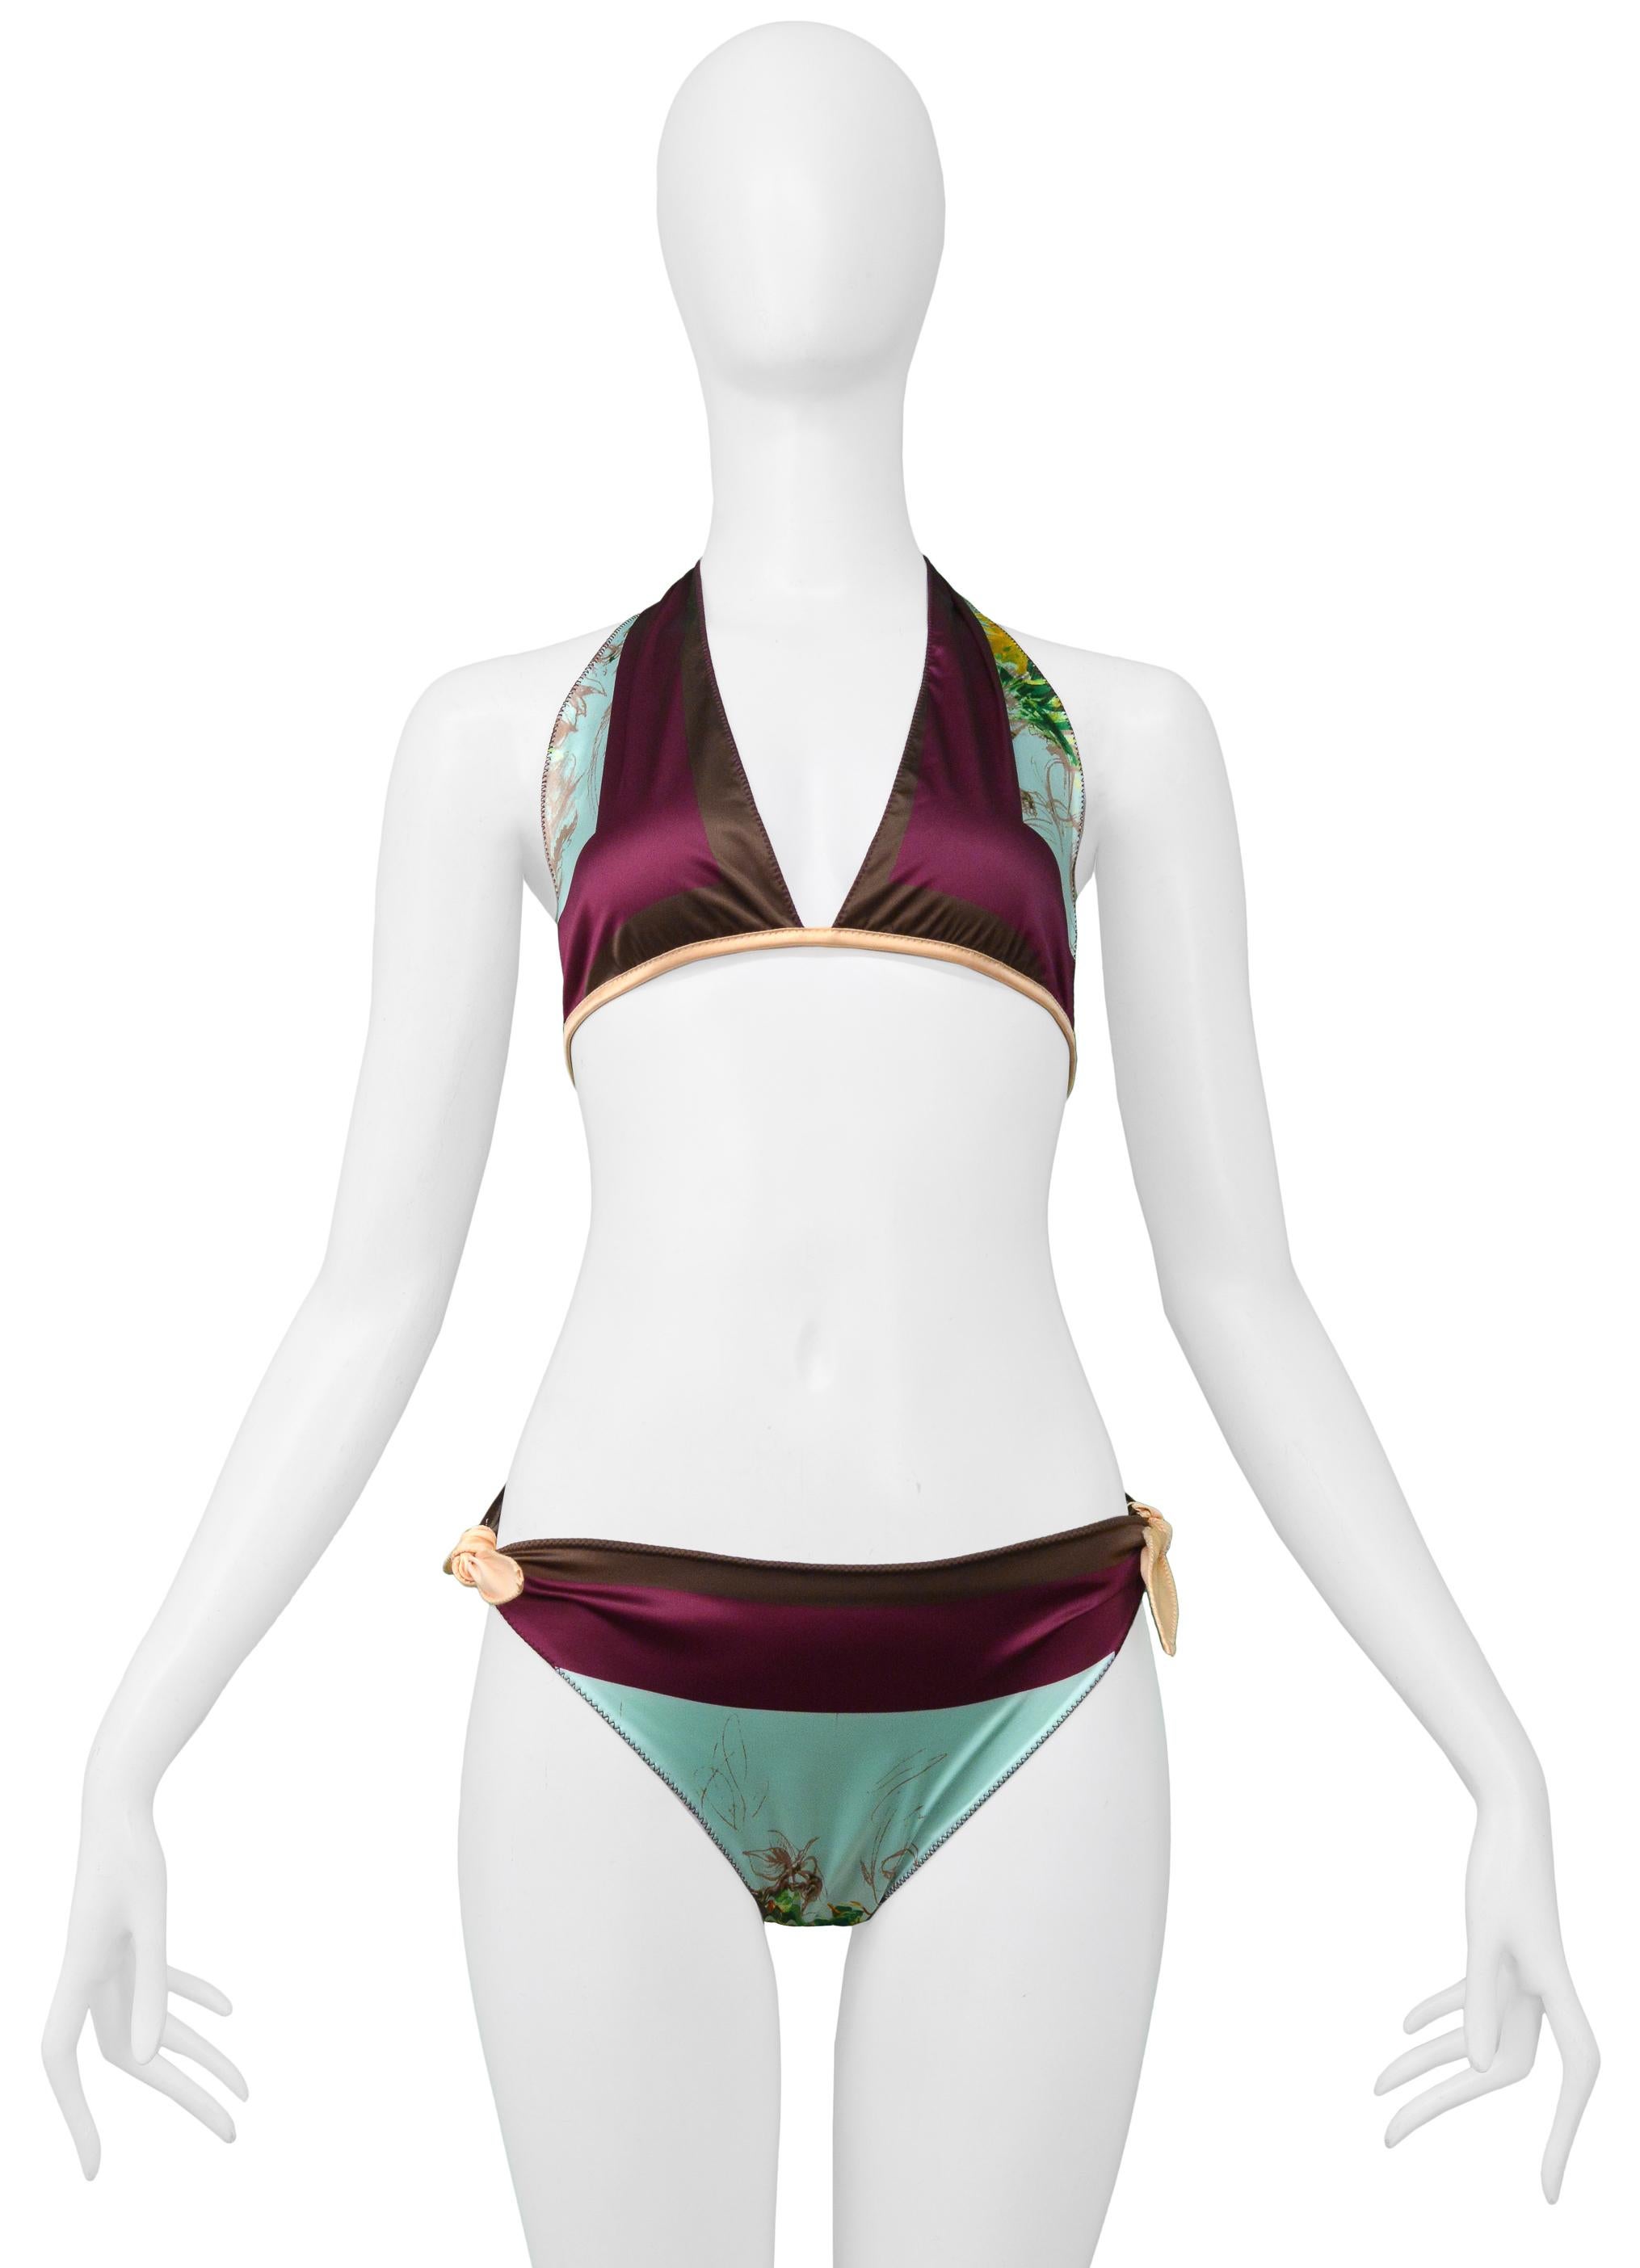 Resurrection Vintage is excited to offer a vintage Jean Paul Gaultier multicolor satin scarf bikini featuring a halter top with tie back and metal clasp, and bikini bottoms with side ties.

Jean Paul Gaultier
Size Medium
Polyester Satin and